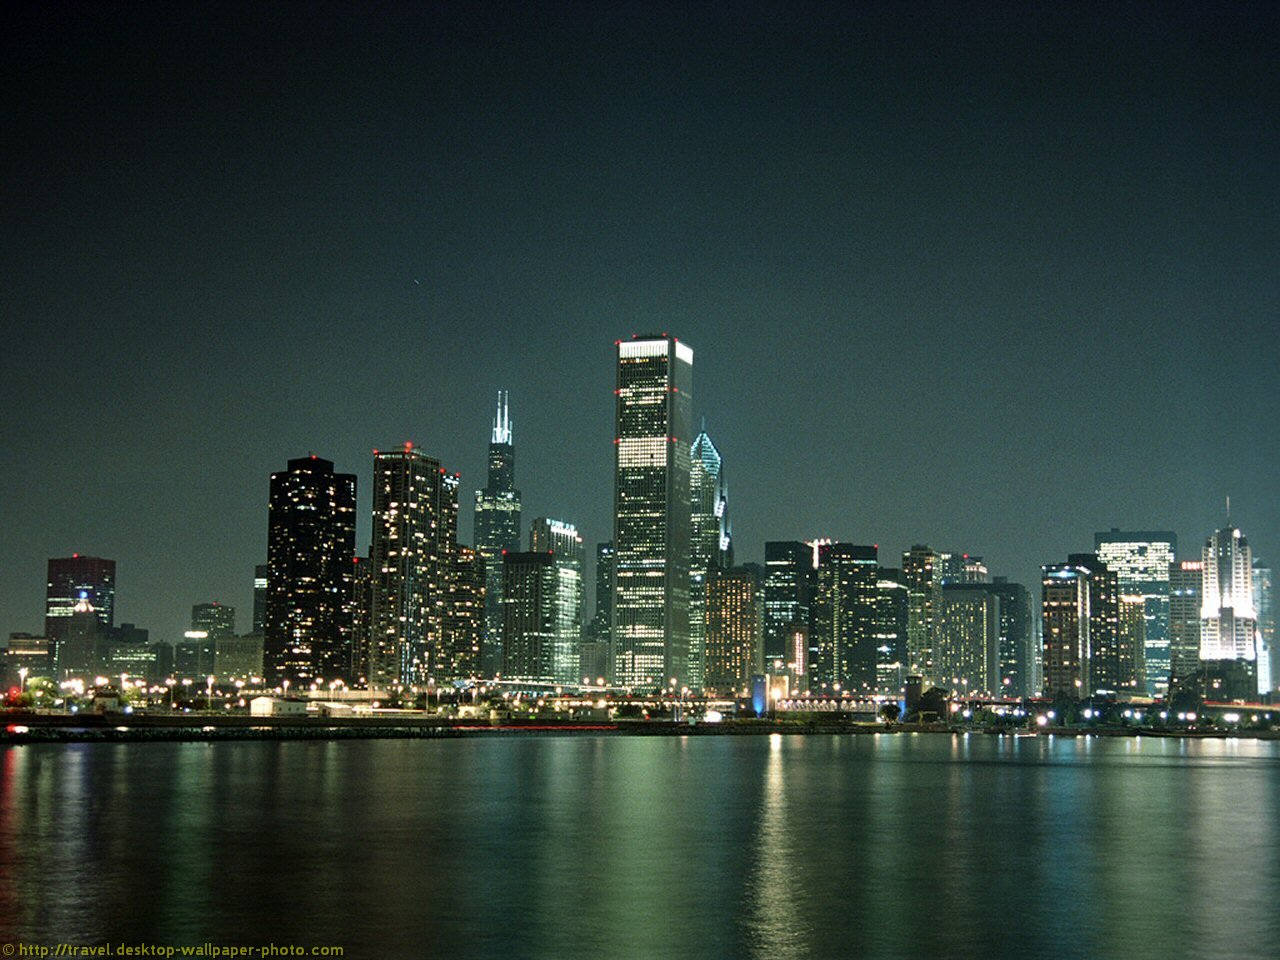 Picture As This Is A Wallpaper From Navy Pier Chicago